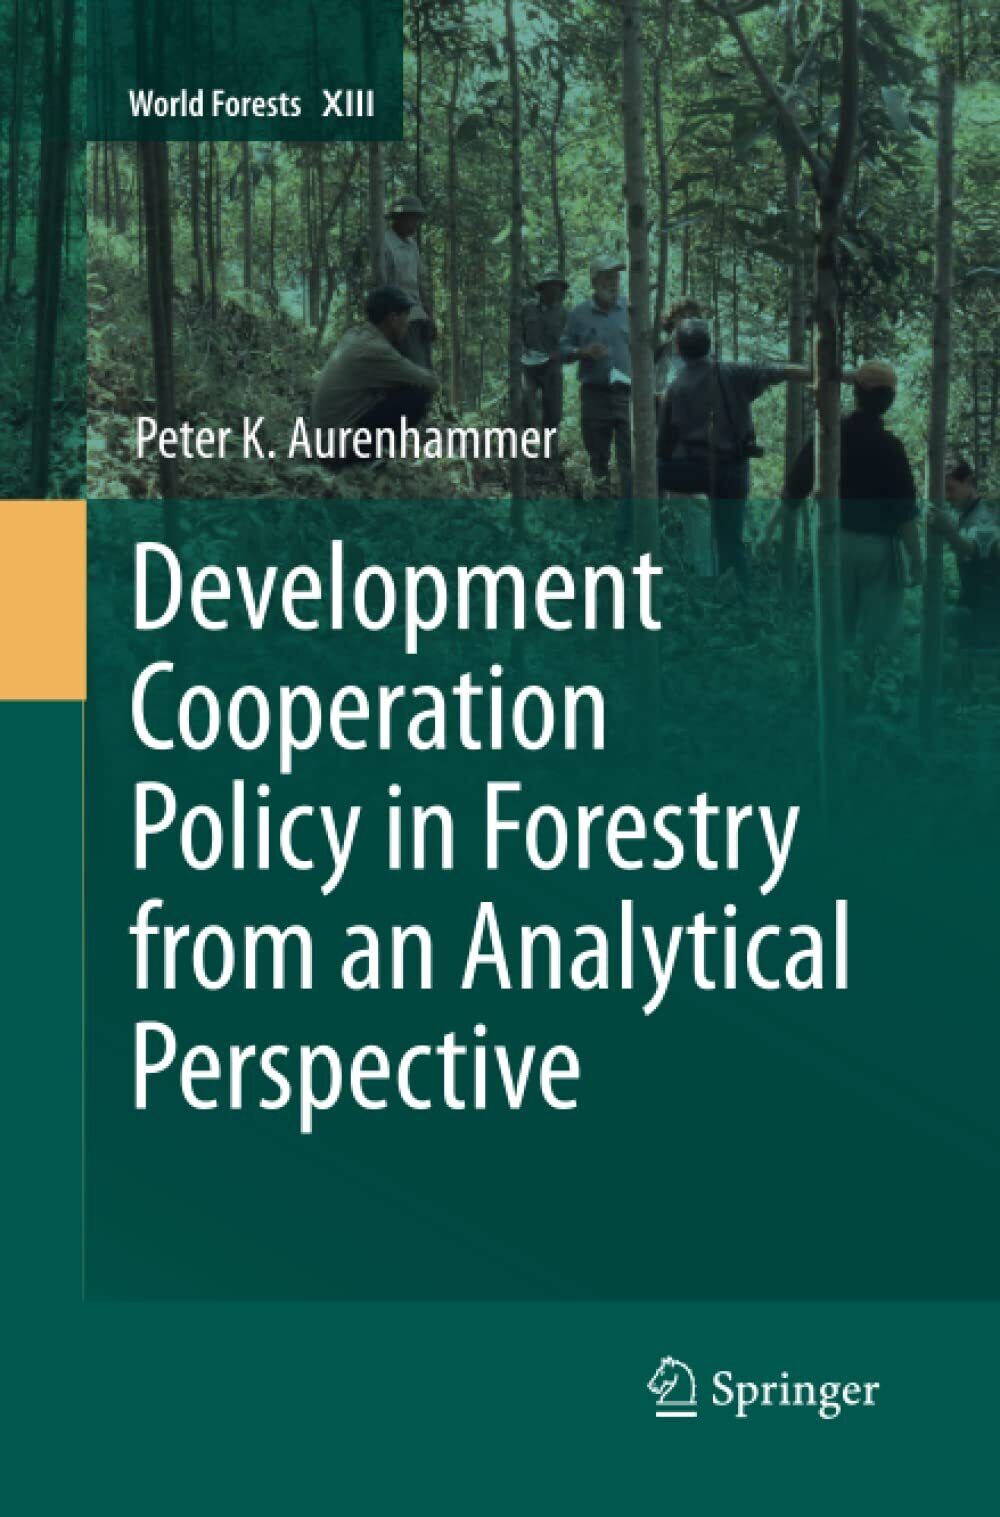 Development Cooperation Policy in Forestry from an Analytical Perspective - 2014